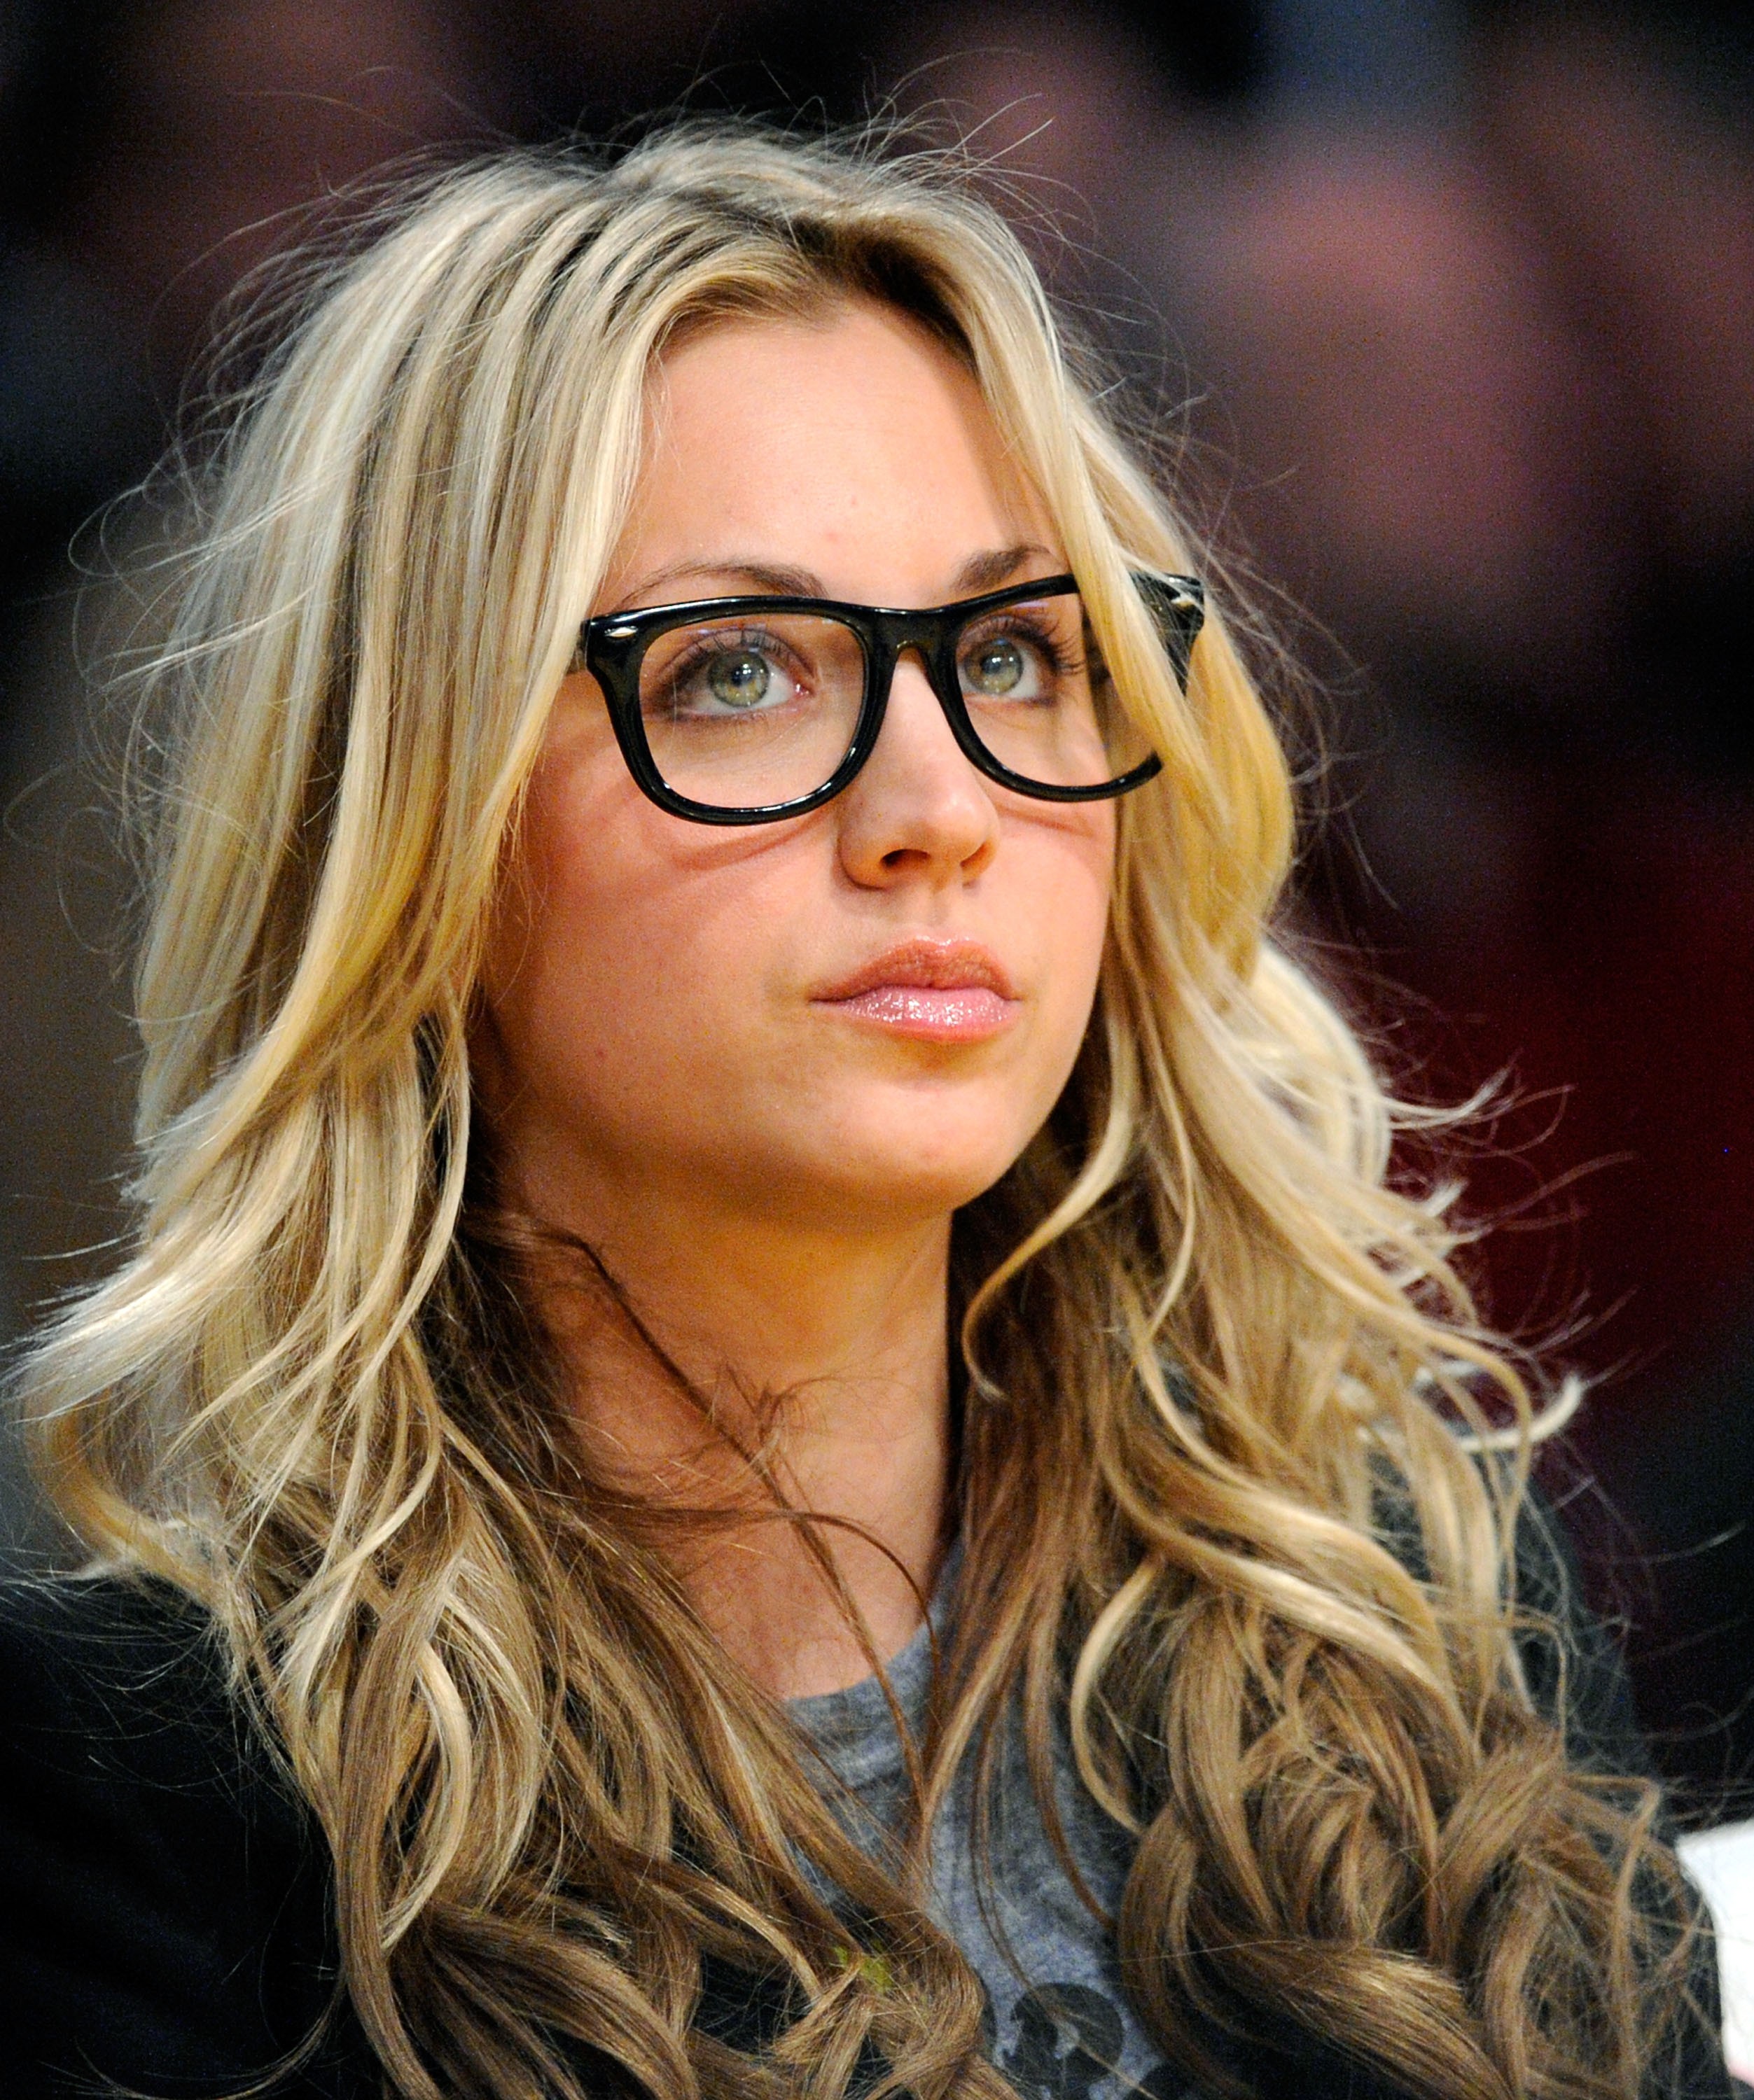 Kaley Cuoco Women Actress Blonde Long Hair Curly Hair Women With Glasses Focused Face Wallpaper